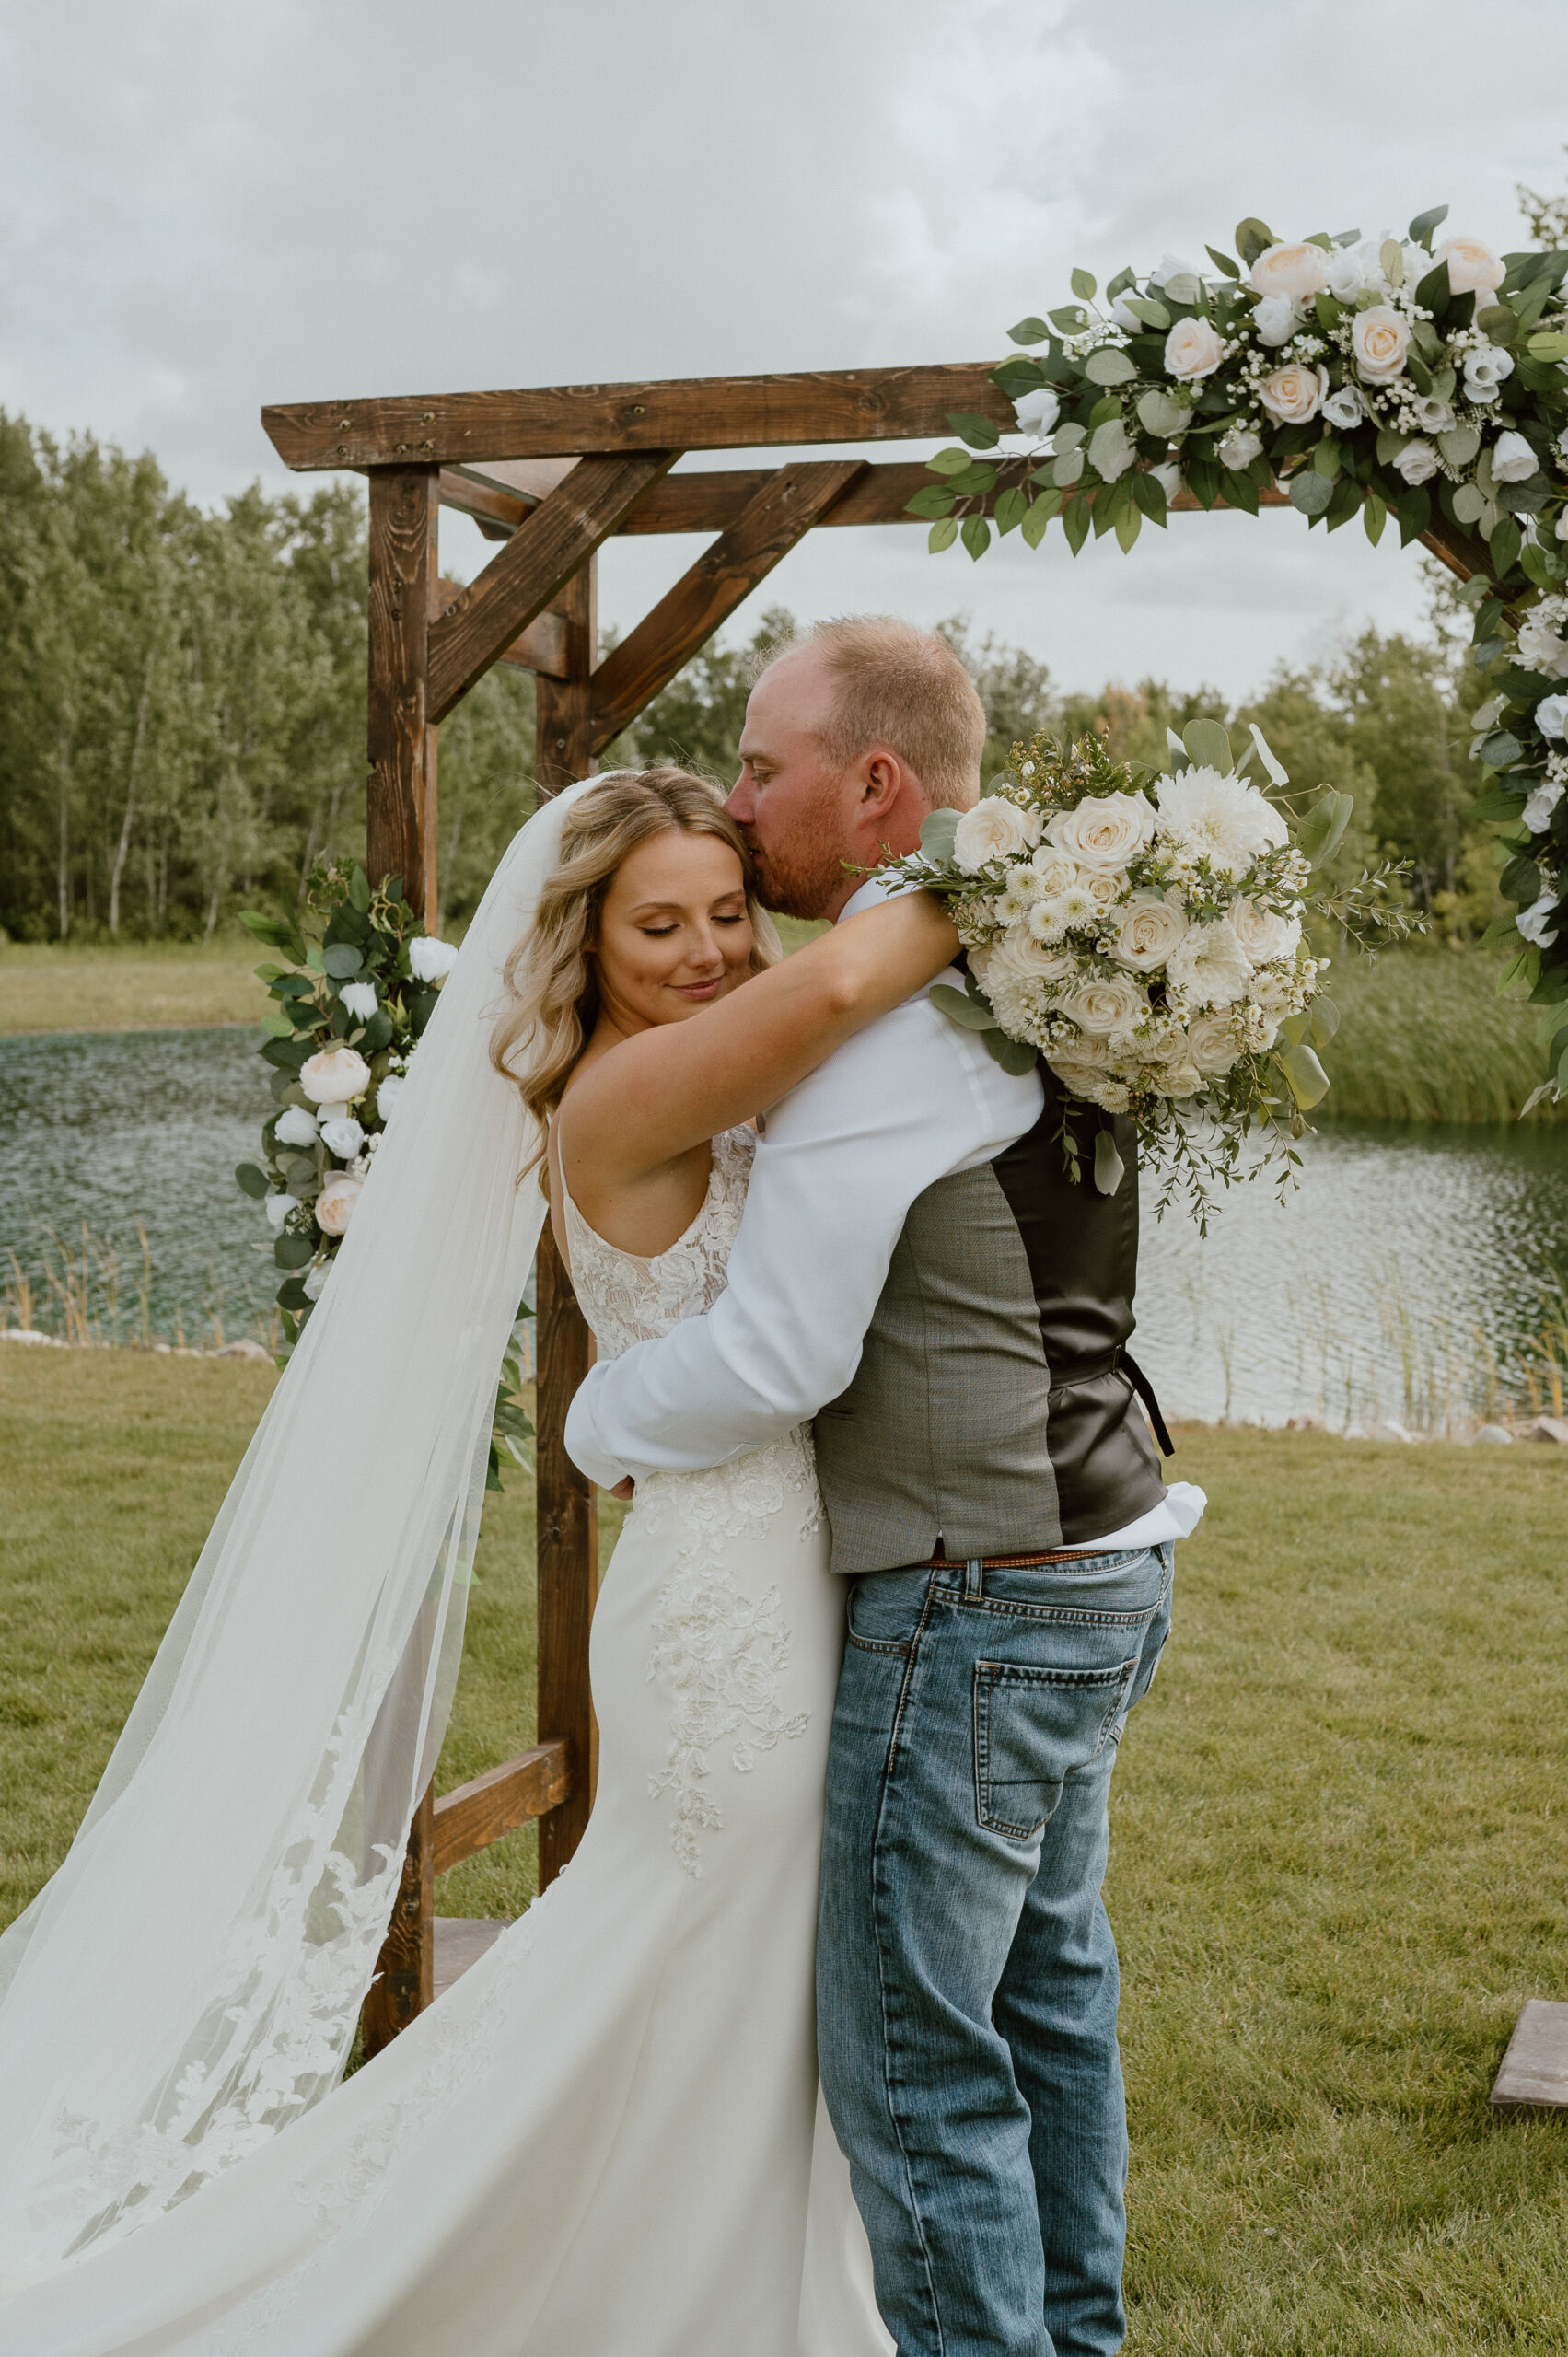 Groom kisses his bride on the forehead at the altar at The White Poplar in Manitoba